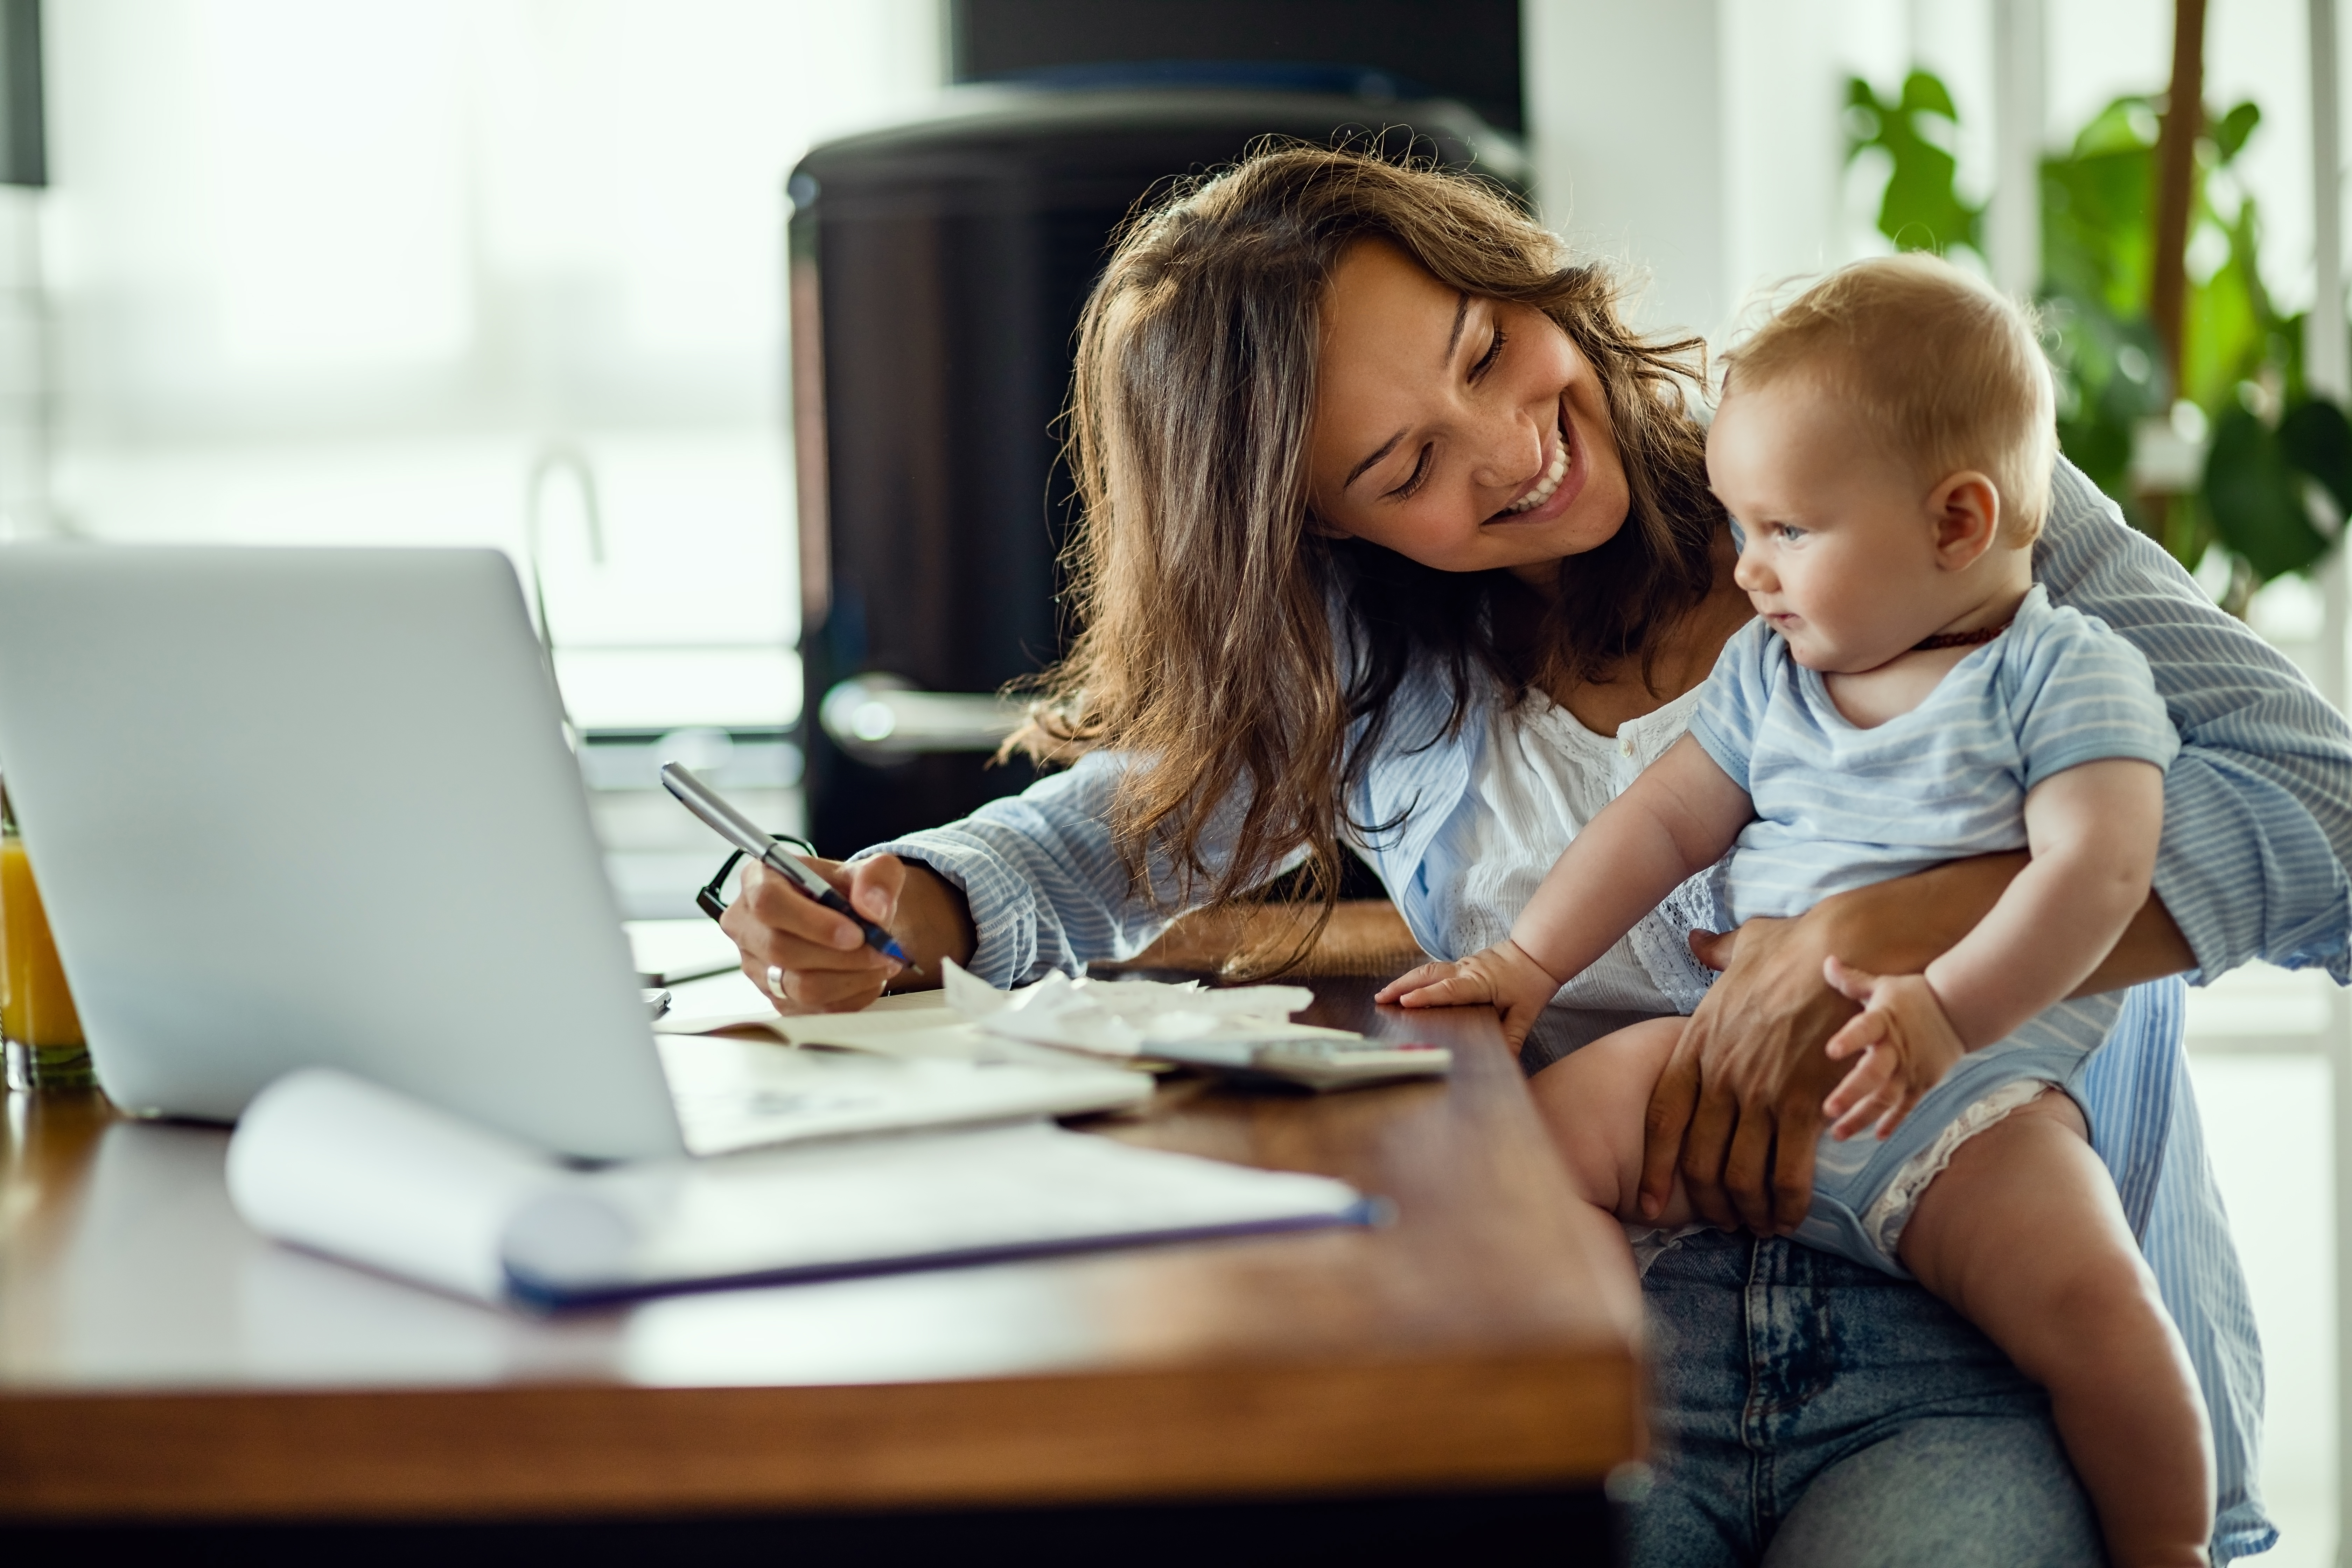 A woman smiling at her child while sitting on a desk | Source: Shutterstock